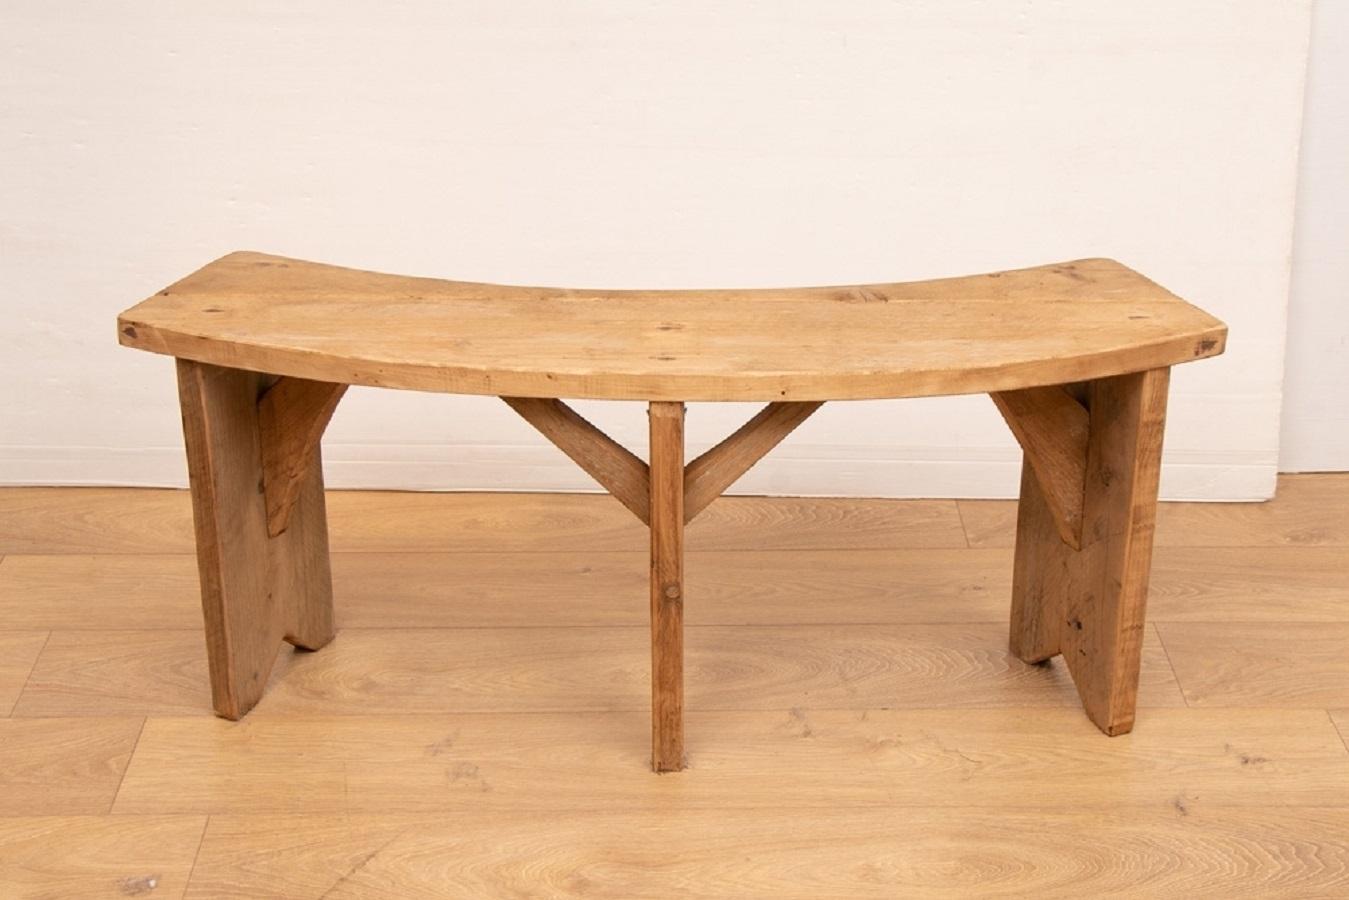 European Set of 6 Circular Reclaimed Pine Benches, 20th Century For Sale